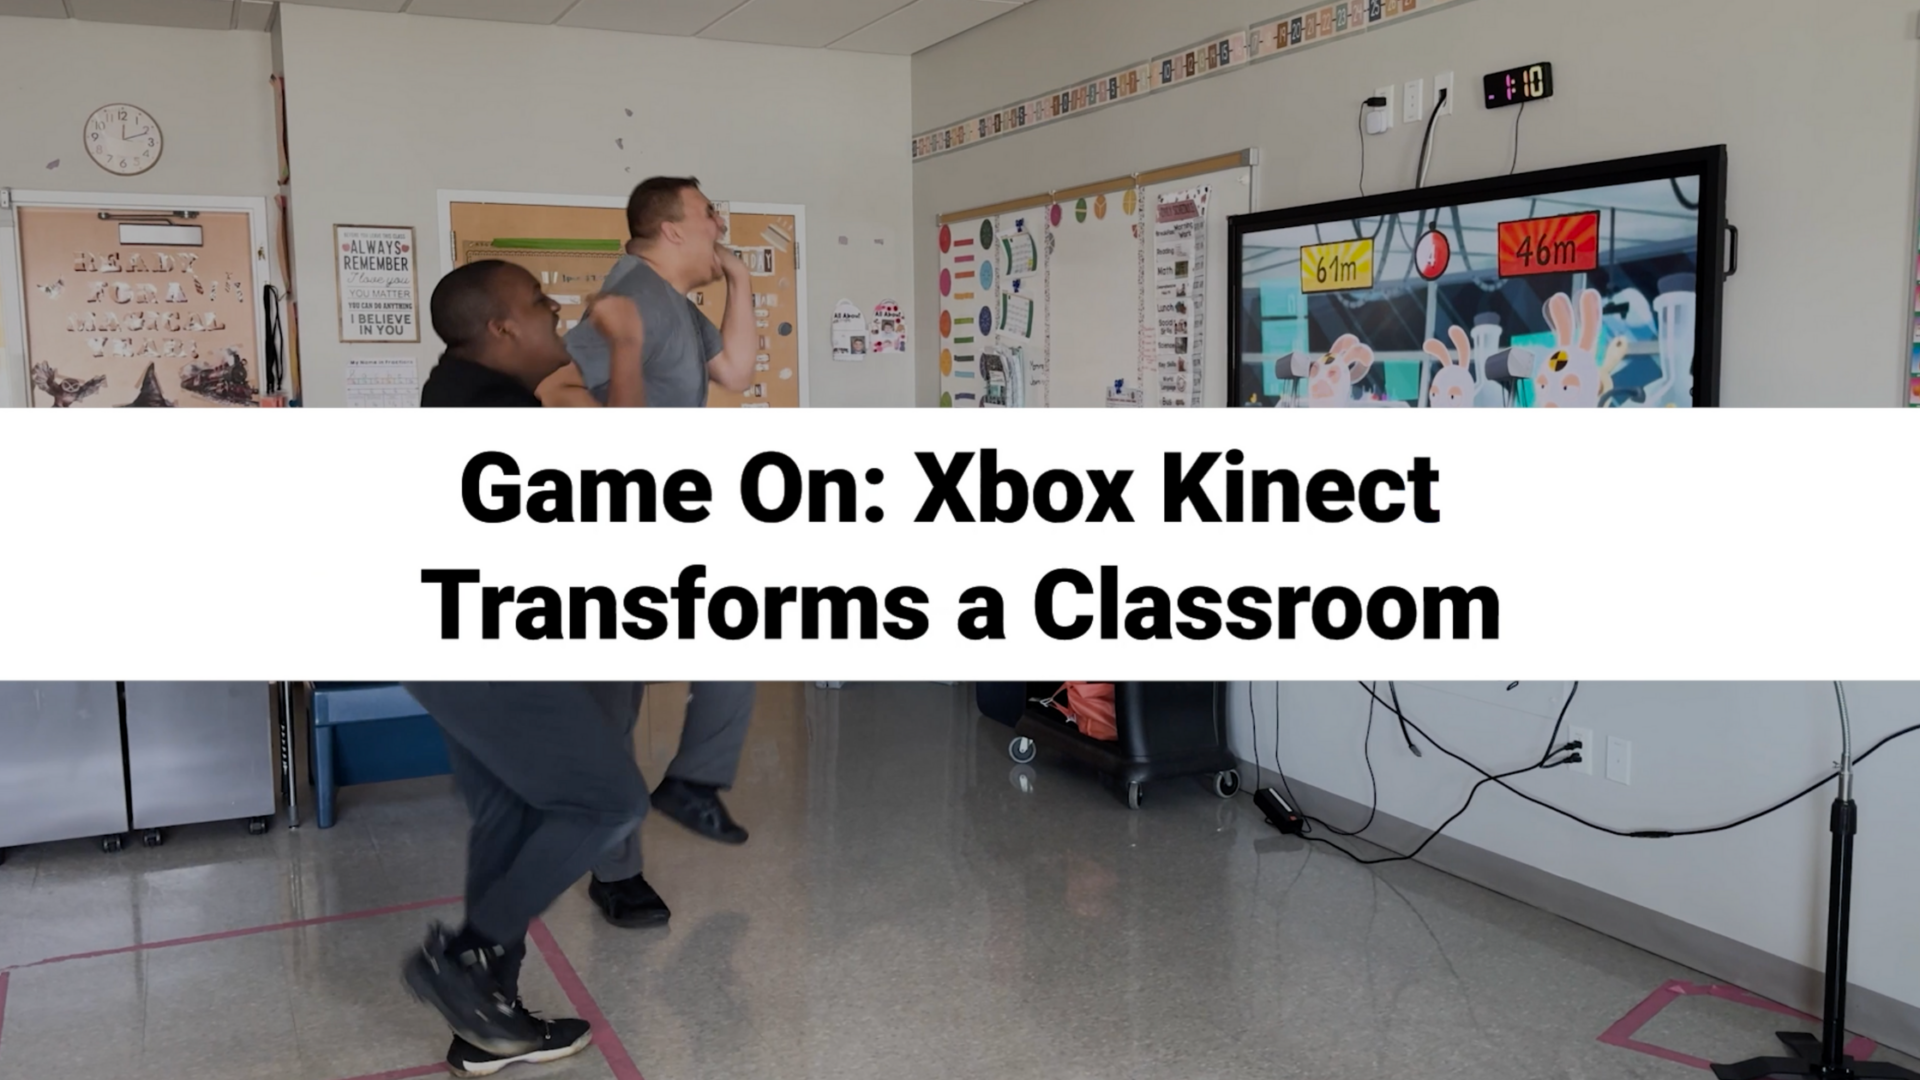 Two students playing the Xbox Kinect. Title overlays the image.